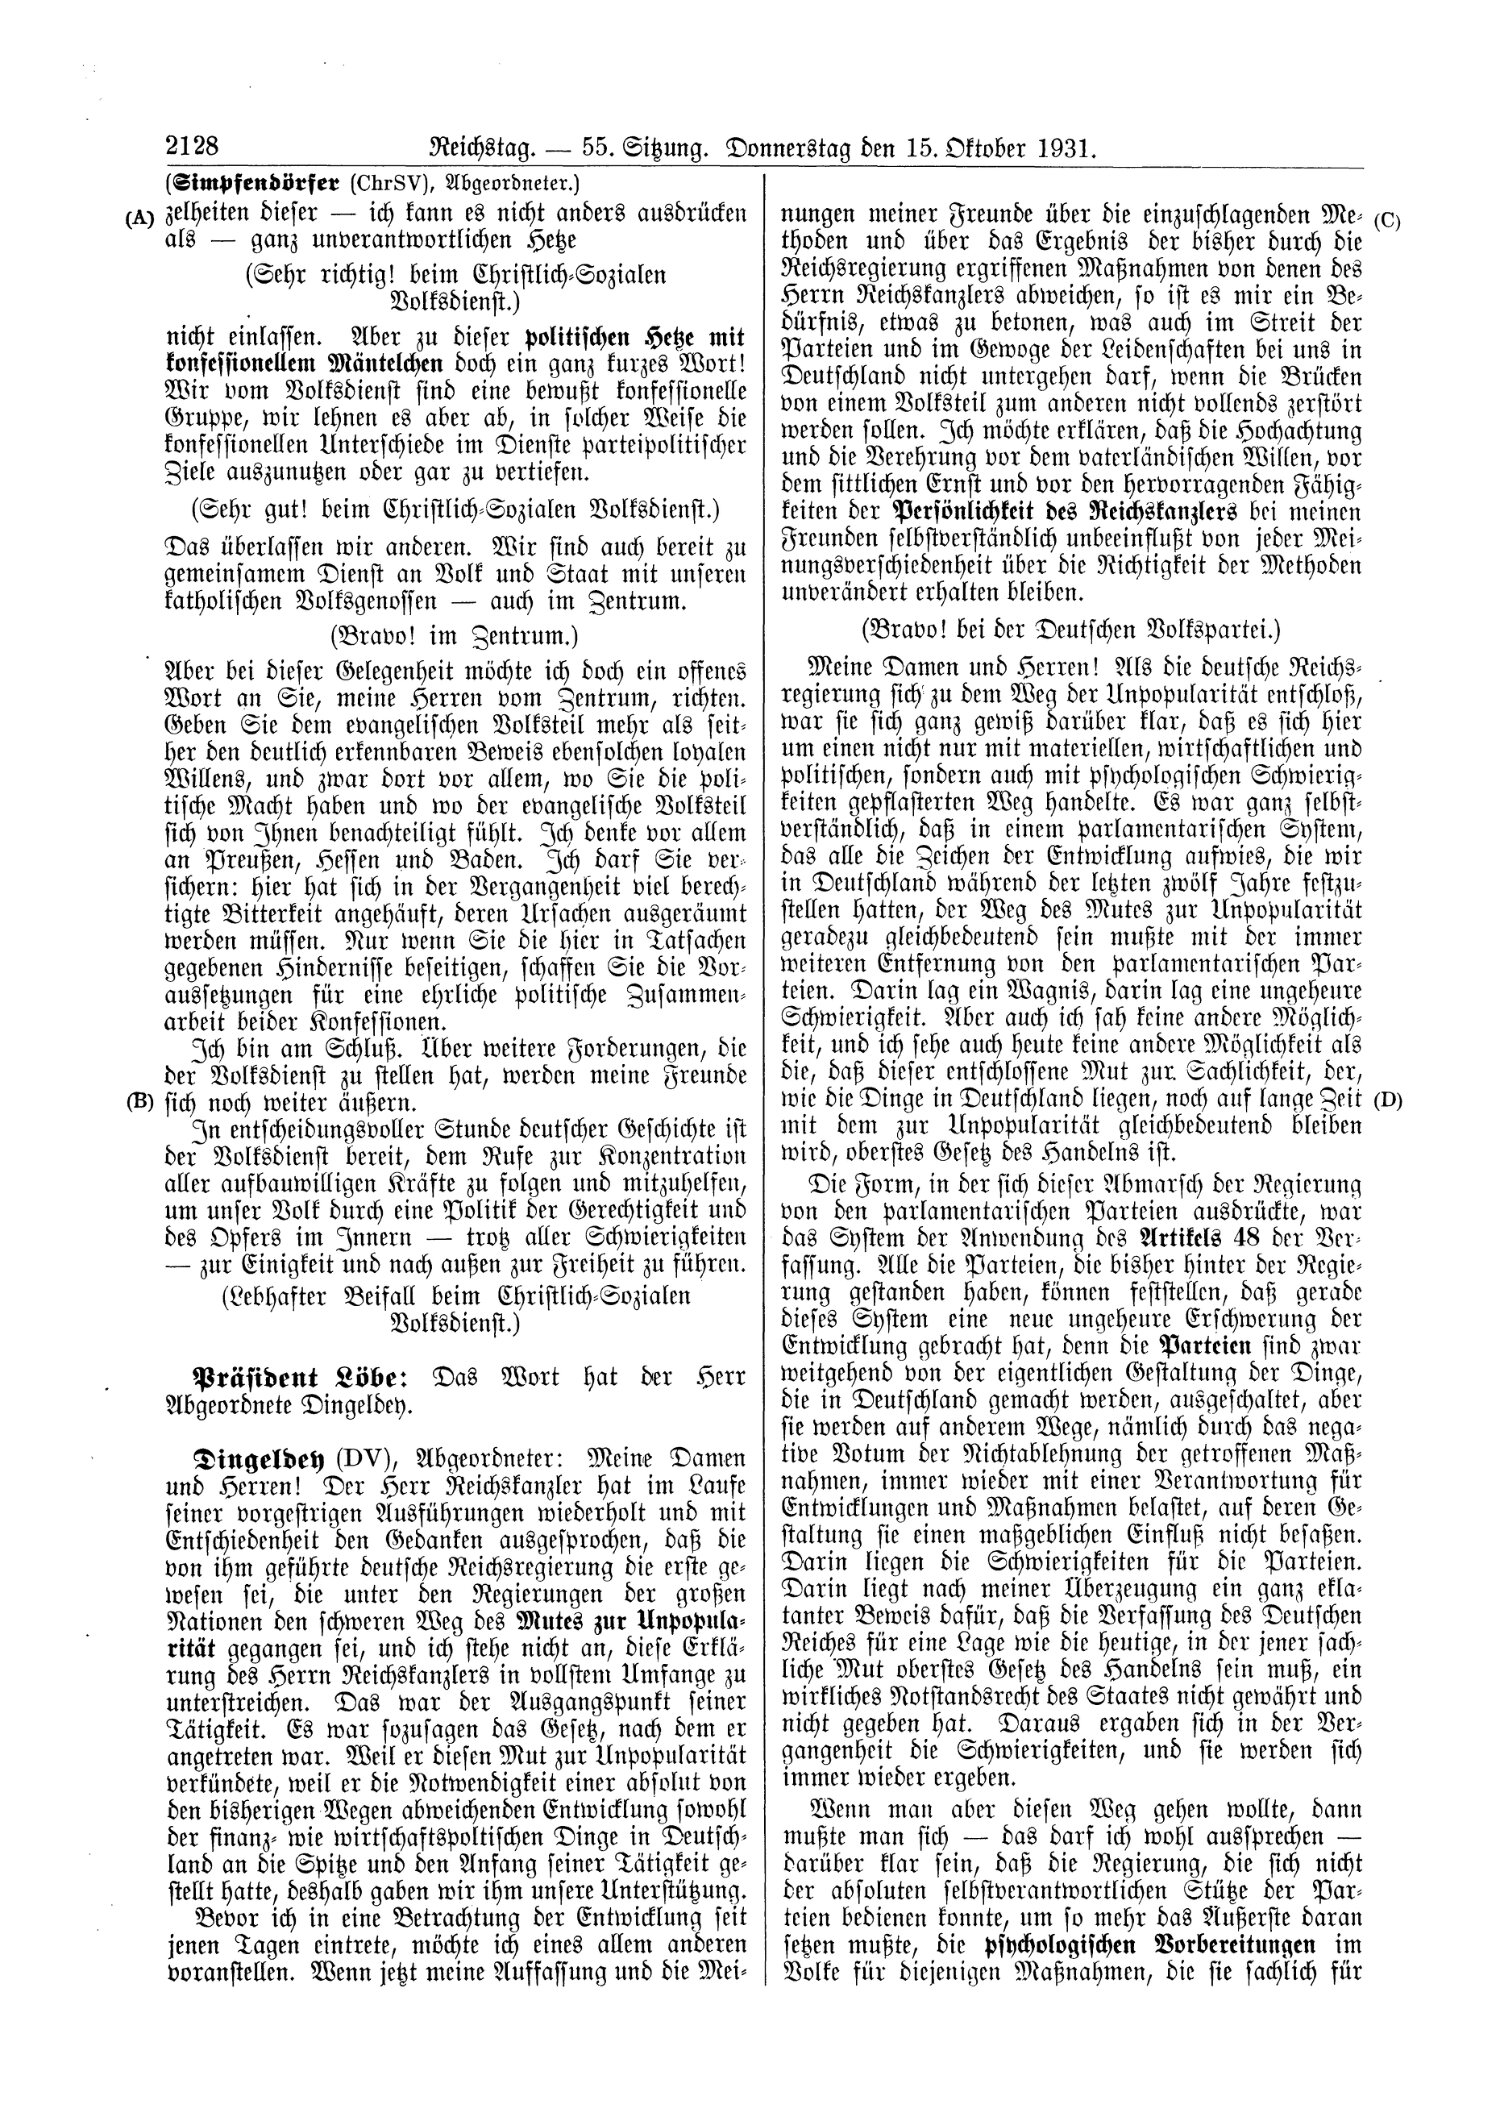 Scan of page 2128